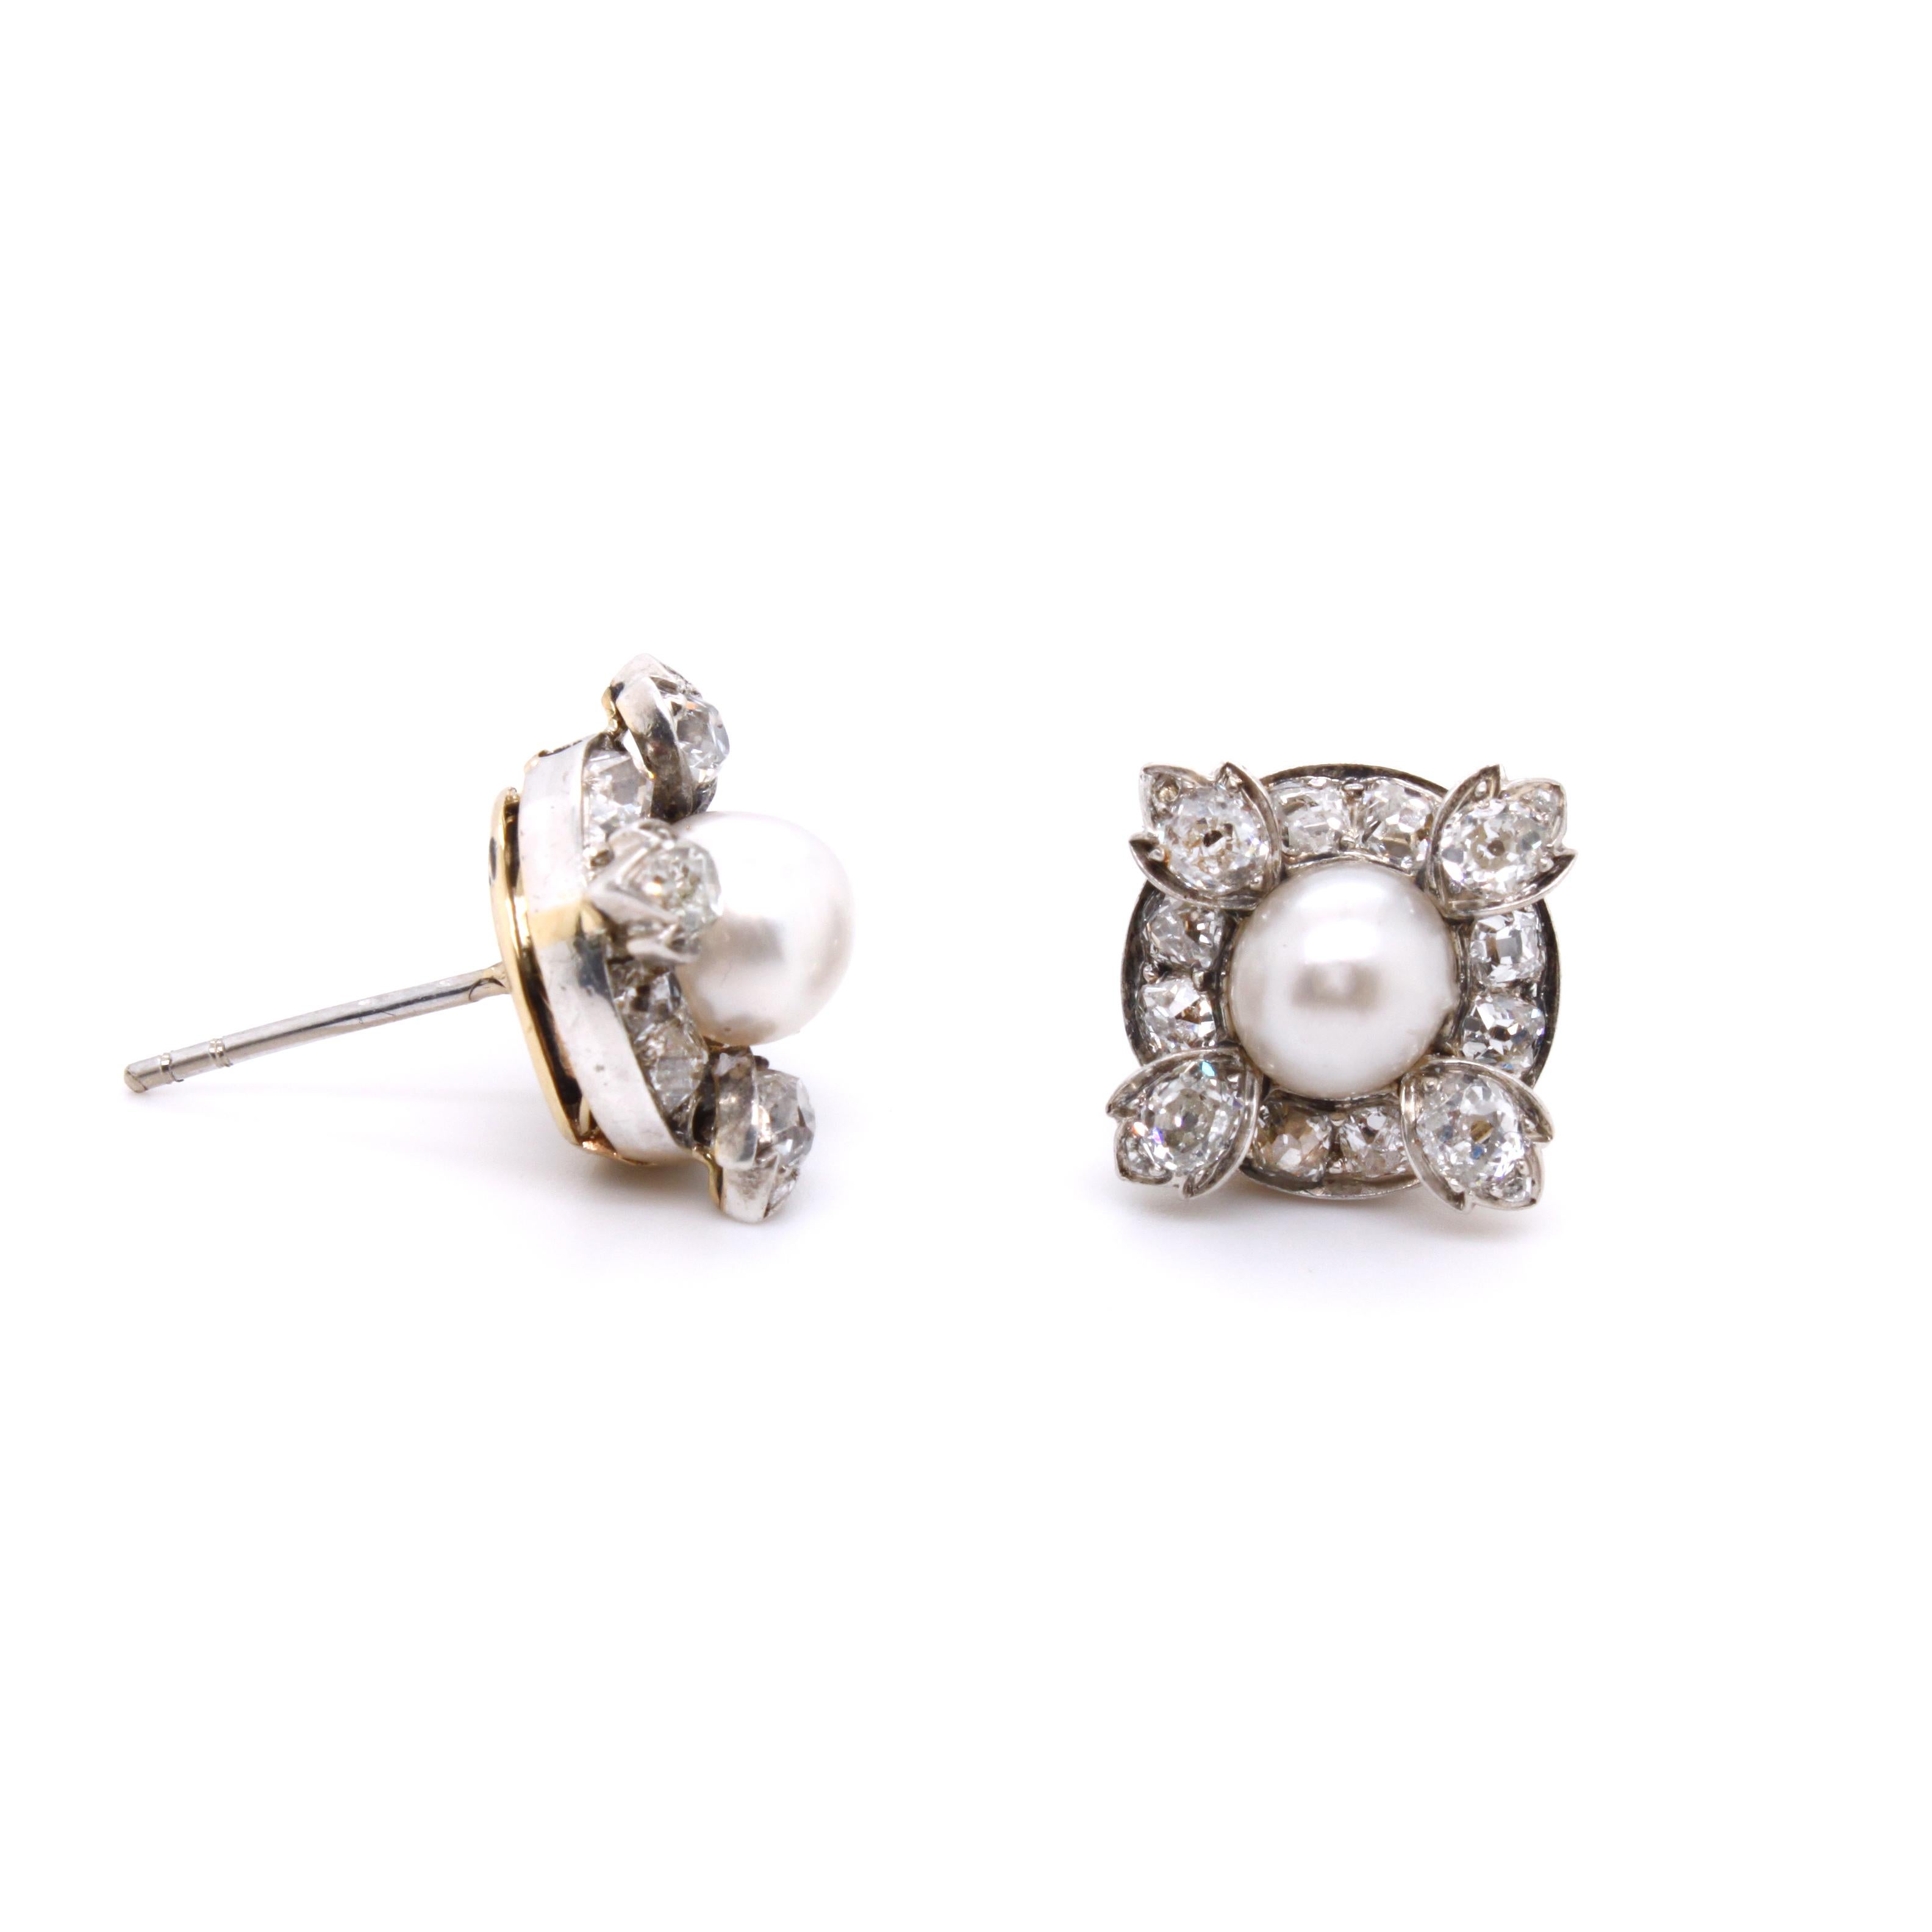 Old Mine Cut Victorian Natural Pearl and Diamond Cluster Earrings, circa 1880s